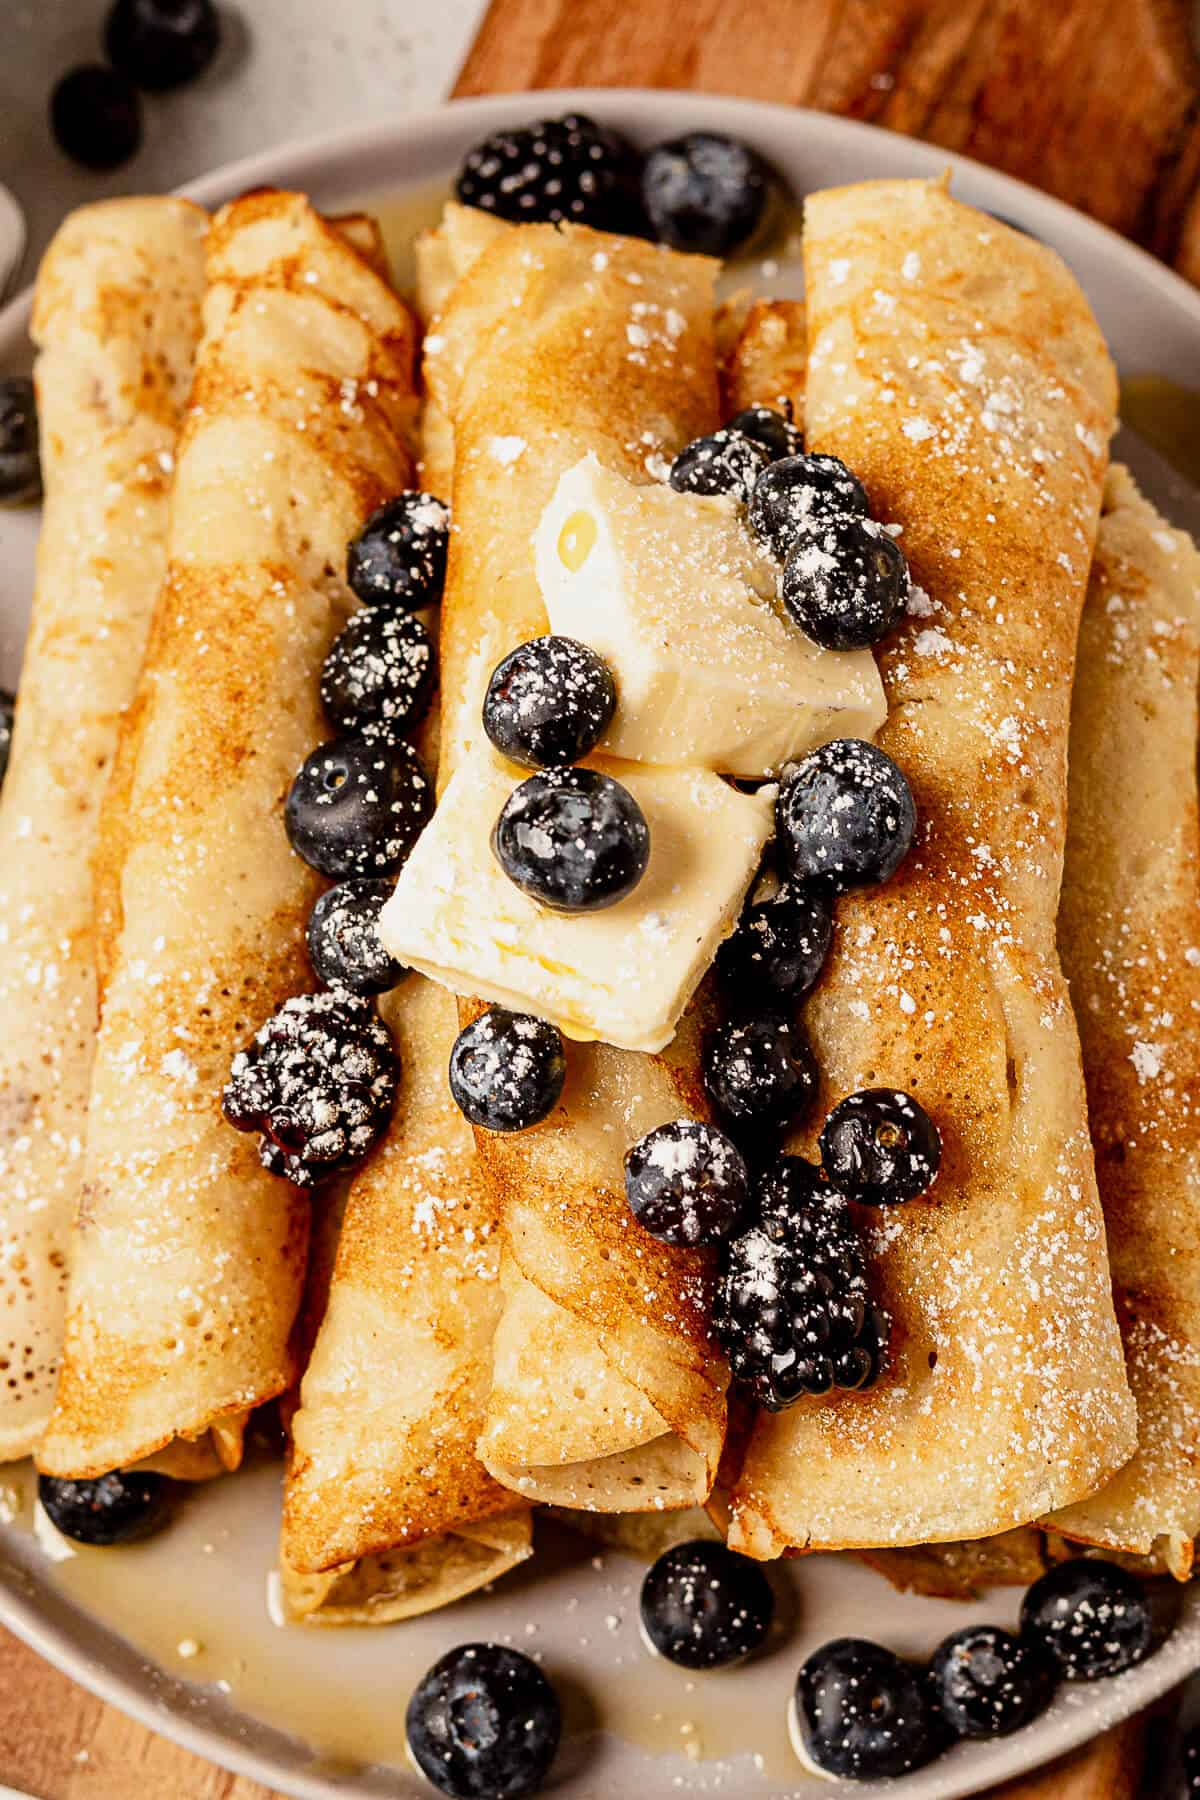 pancake roll ups with berries, butter, and syrup